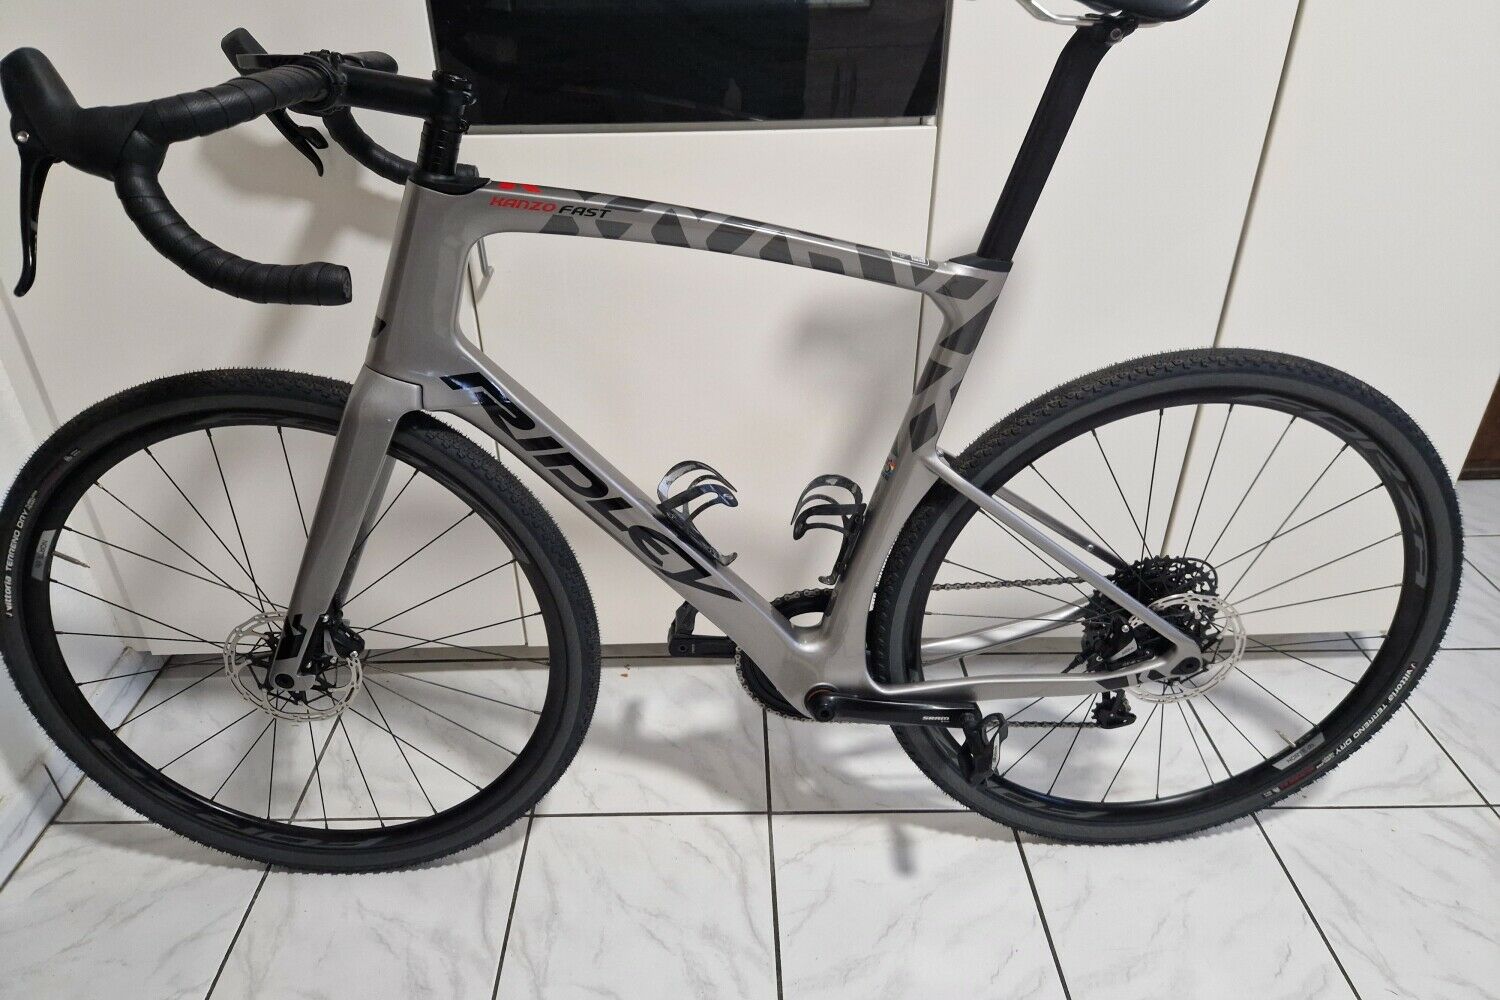 Ridley kanzo fast large nieuwstaat